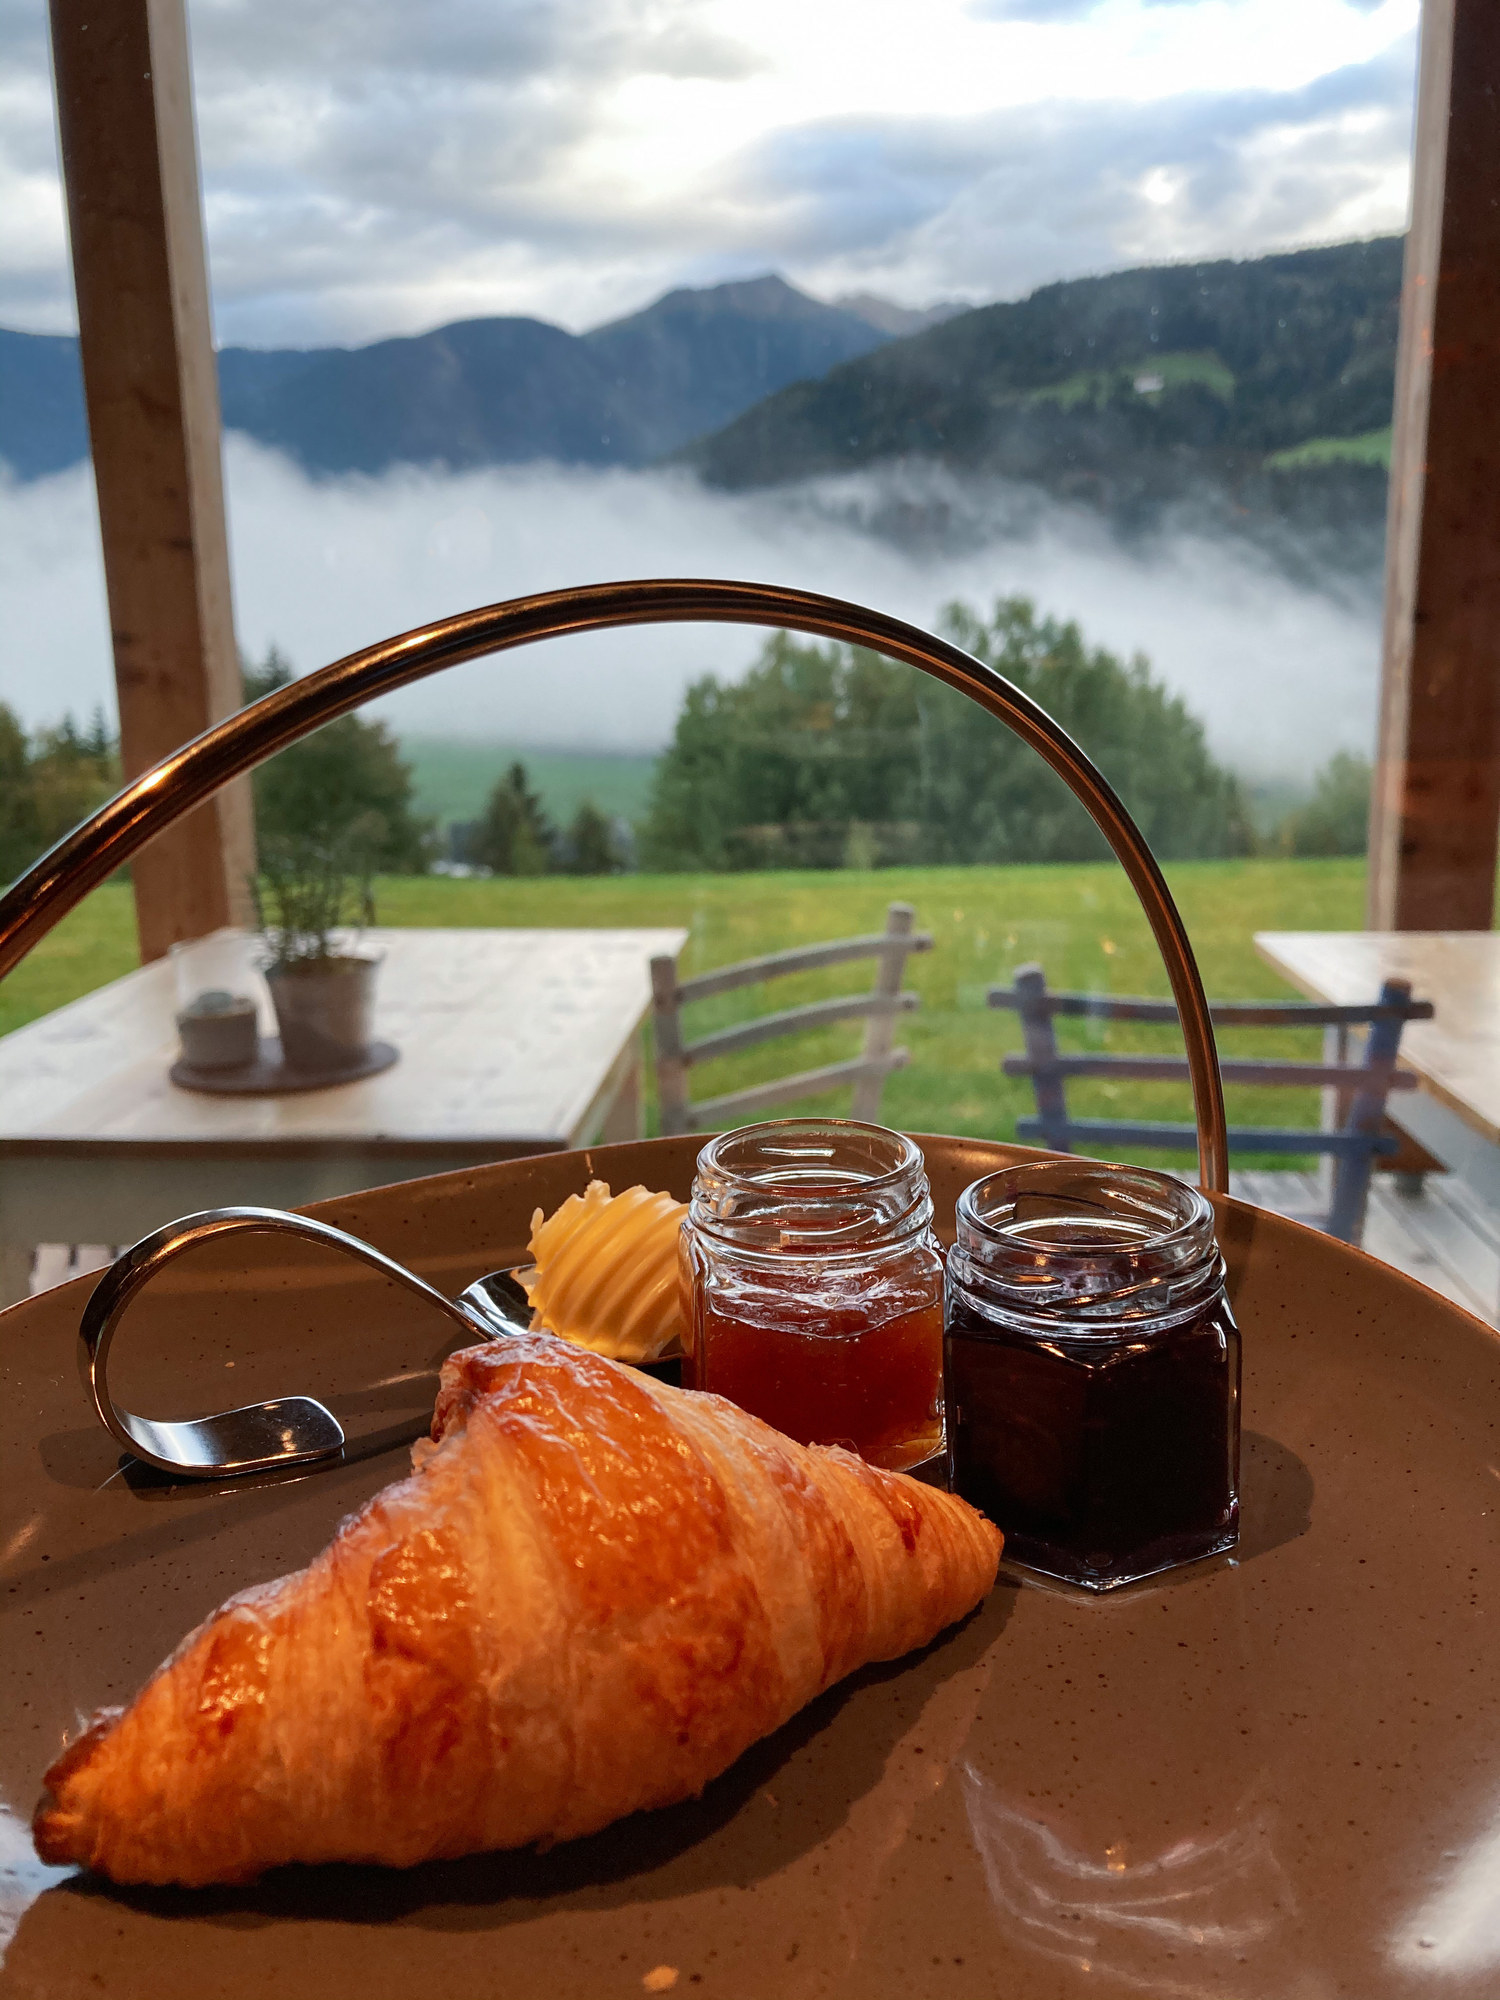 Croissants, butter, and jam with a view.